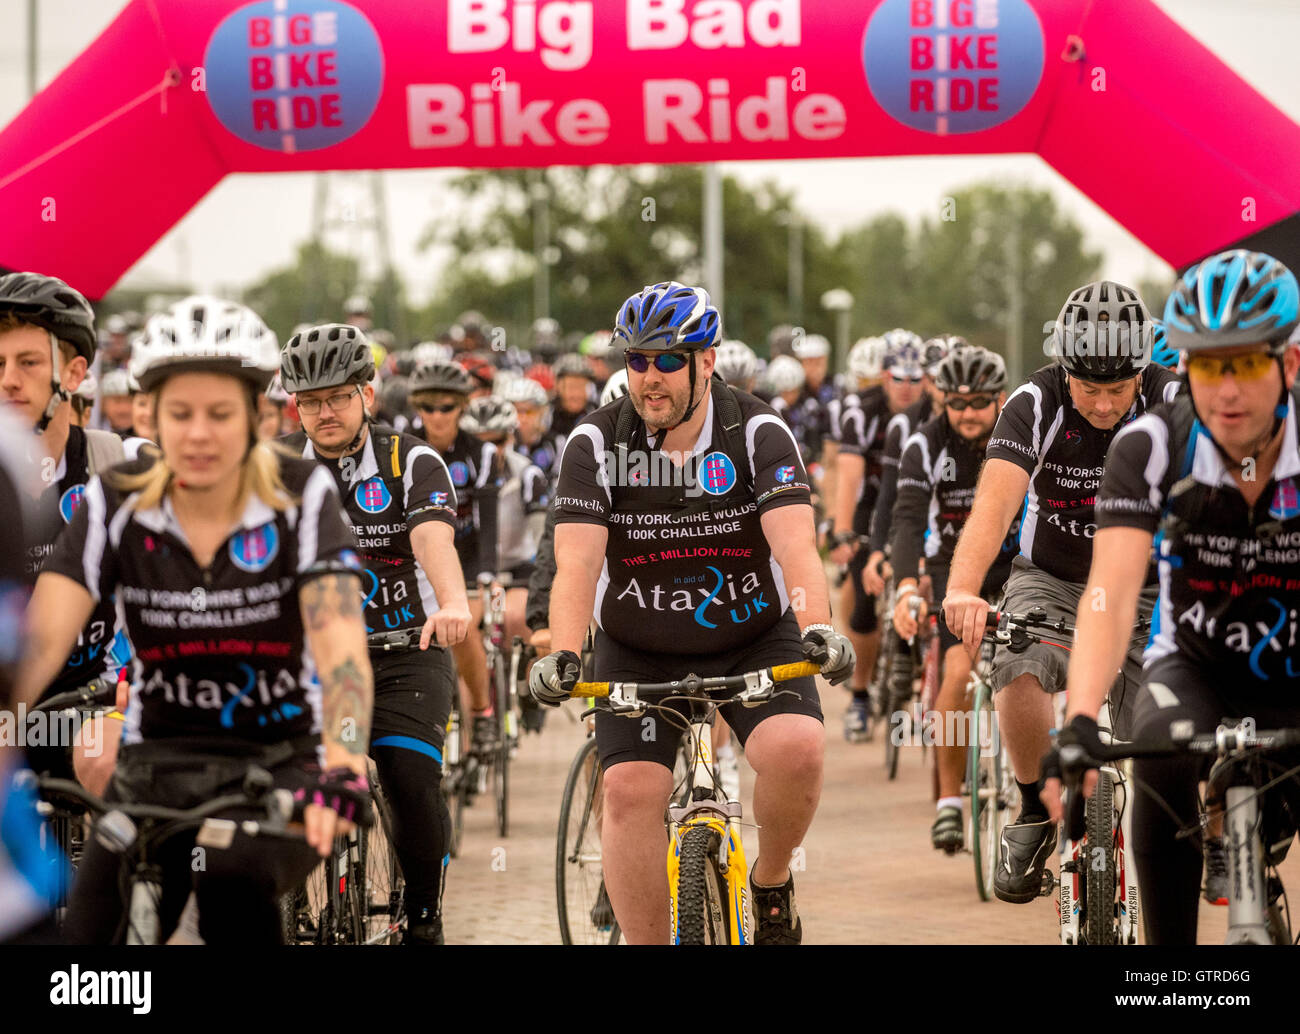 York, UK. 10th September, 2016. Over 400 riders set off on the Big Bad Bike Ride, an annual sponsored bike ride which was set up in 1991 to raise money for Ataxia UK, a charity which supports research into potential cures for Friedreich's ataxia. The 2016 ride will take the total raised to over one million pounds.. Photo Bailey-Cooper Photography/Alamy Live News Stock Photo